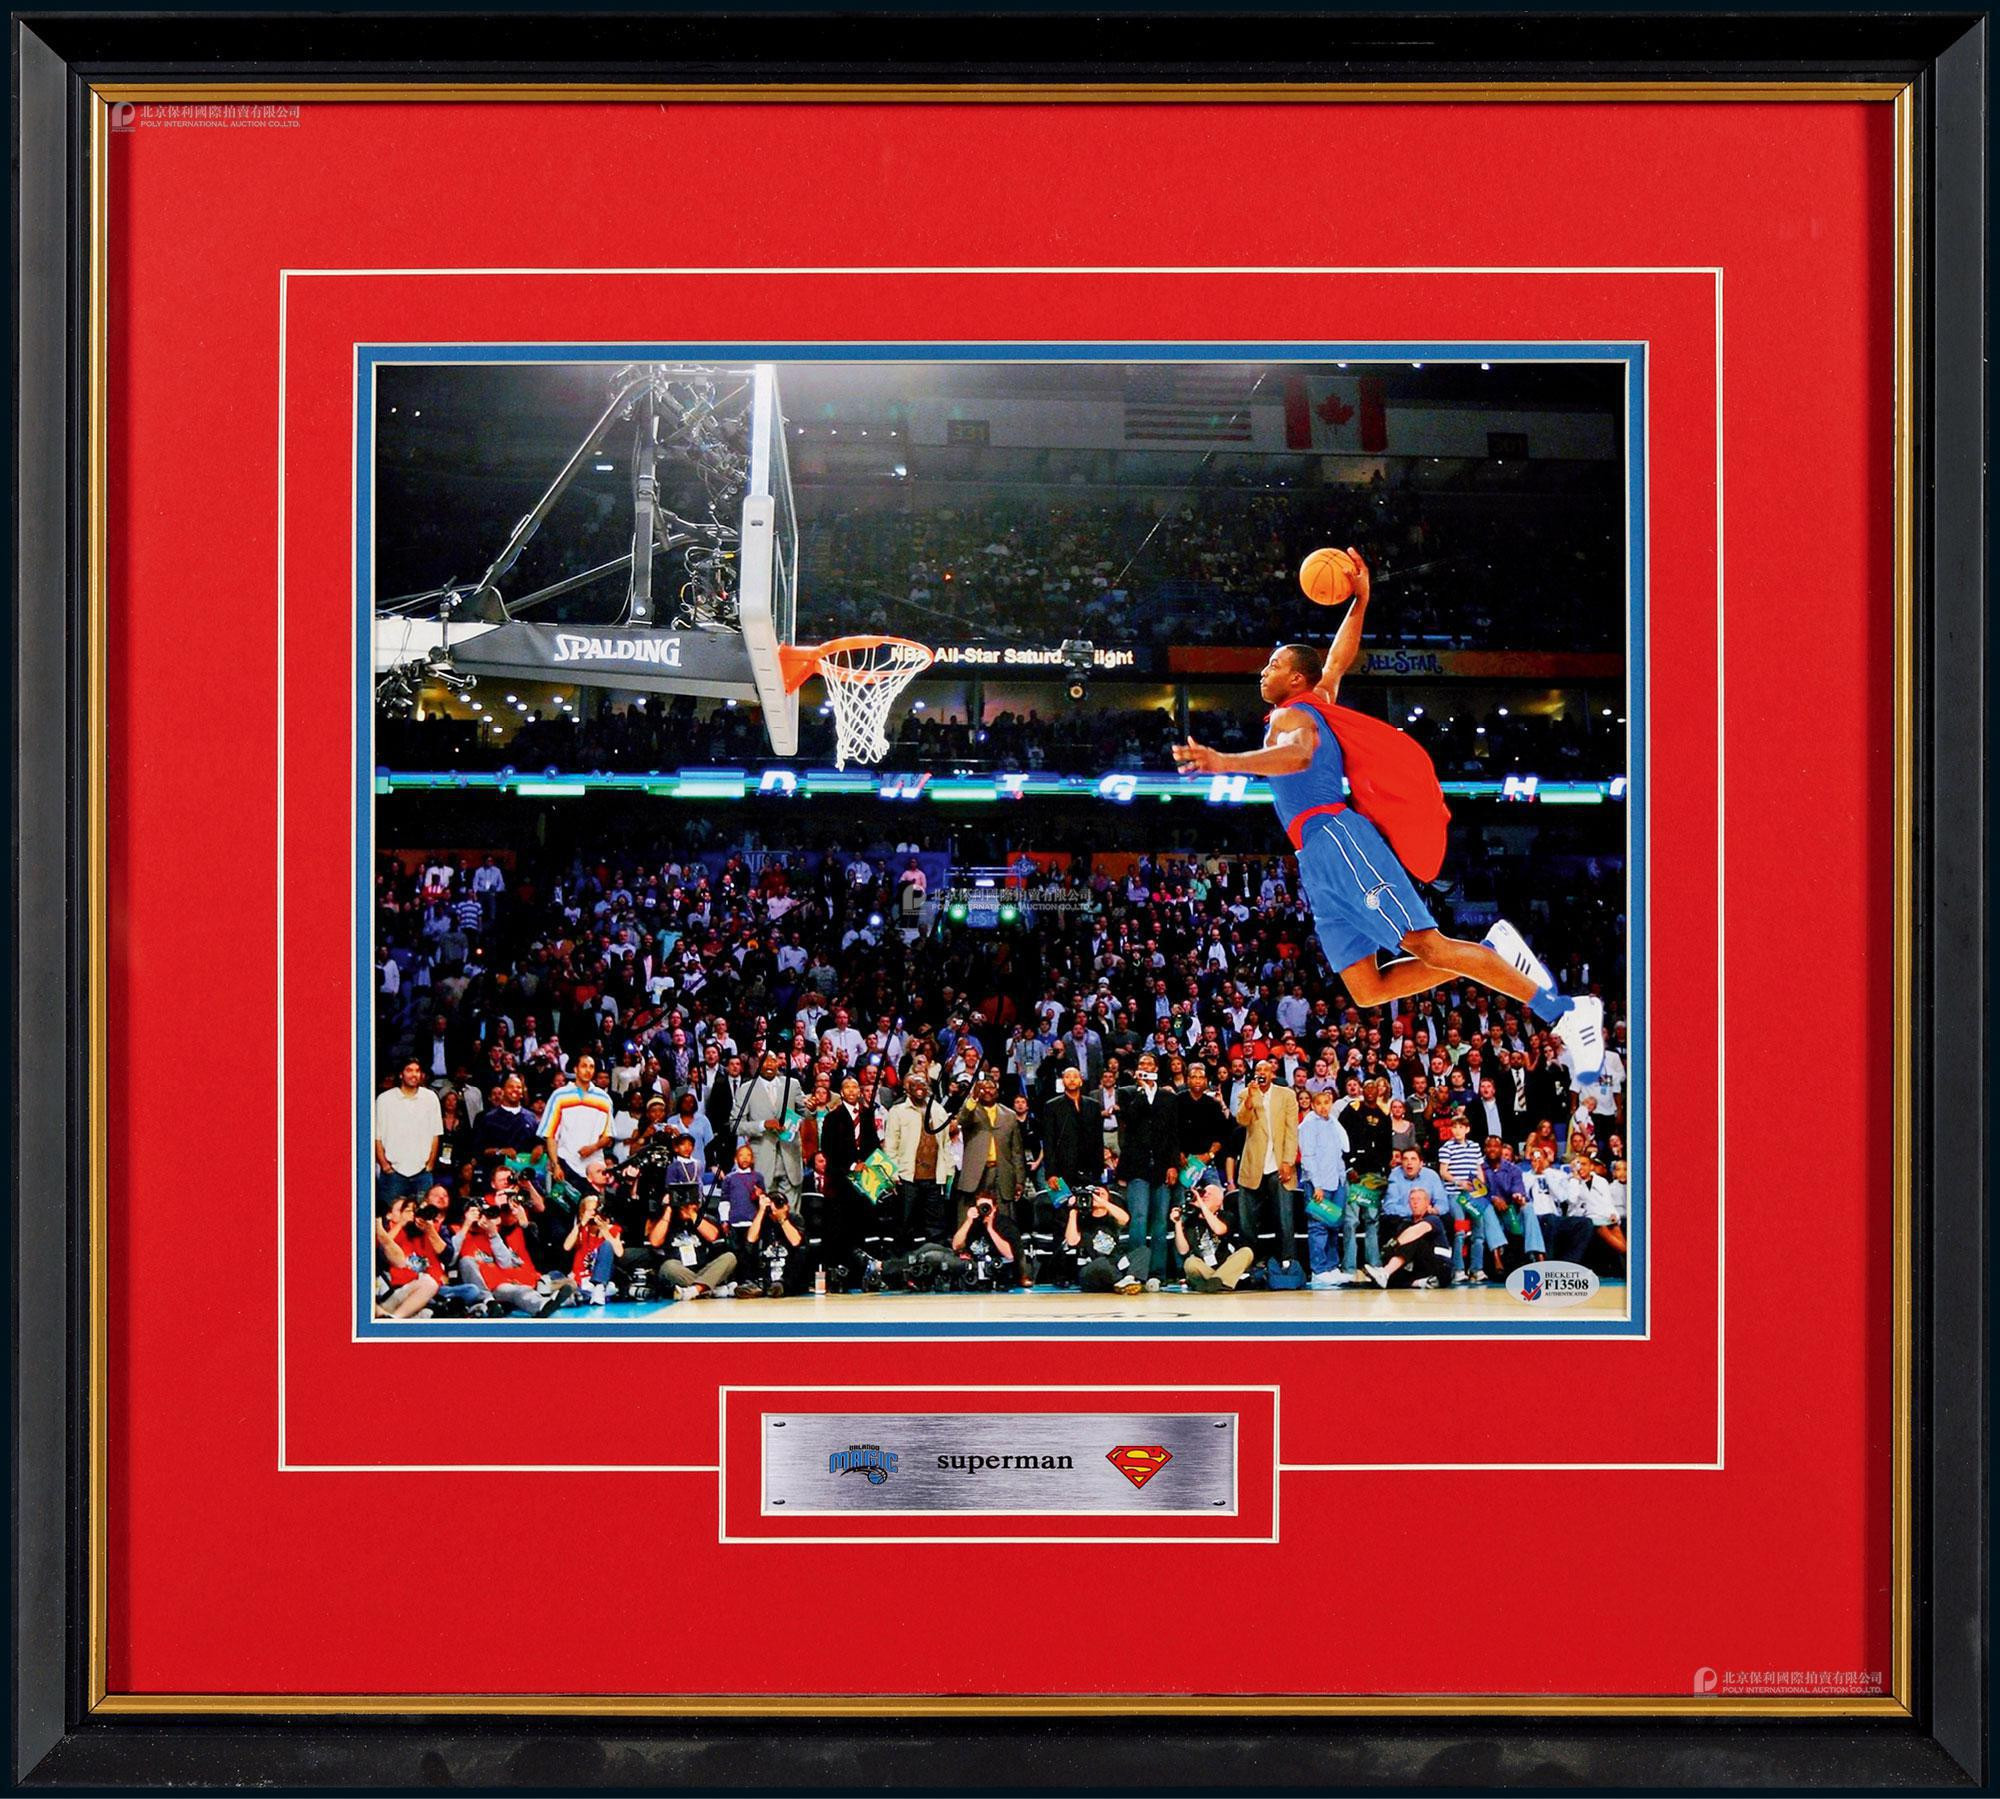 The autographed photo of Dwight Howard, the “NBA Superstar”, with certificate